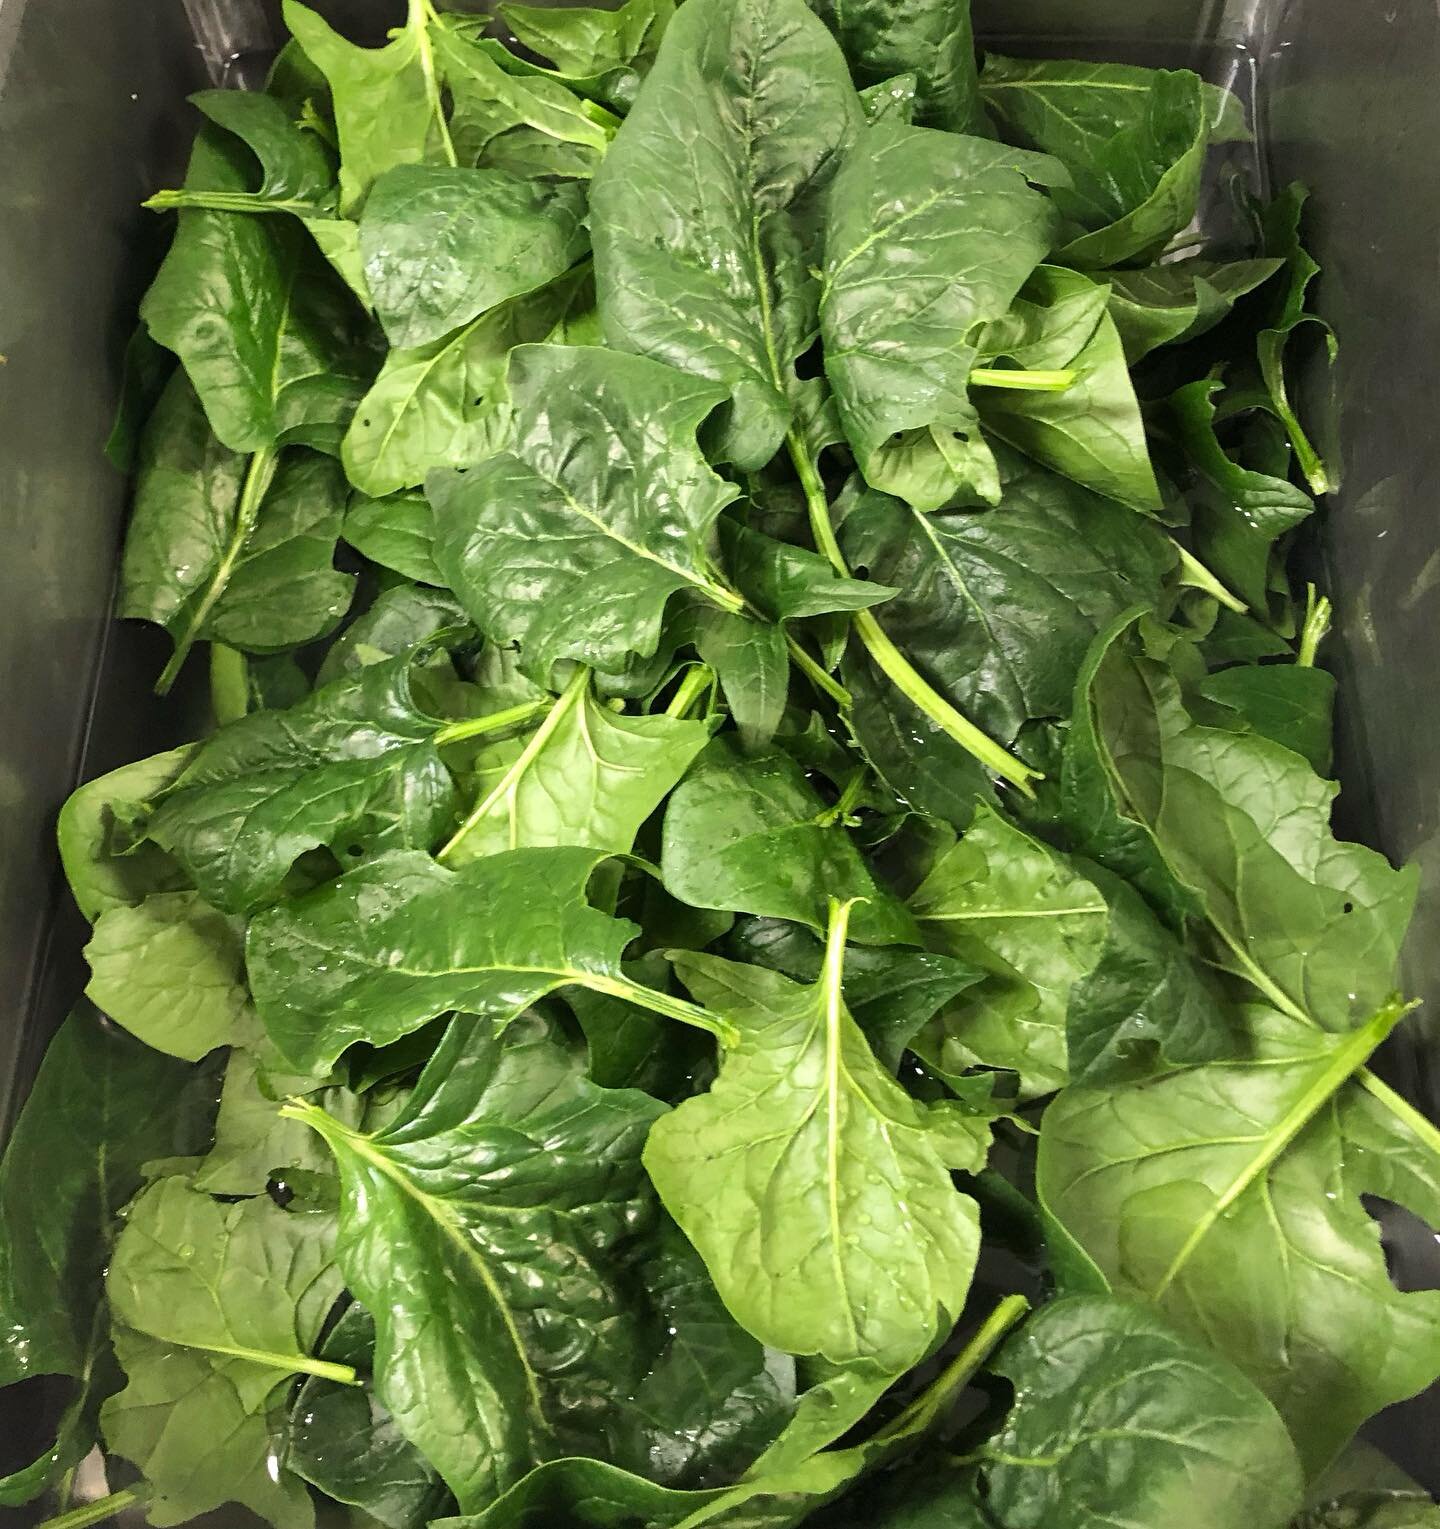 Loaded with fresh spinach and baby kale (and a bit of salad mixes, garlic, preserves, honey etc.) this afternoon 4-6.